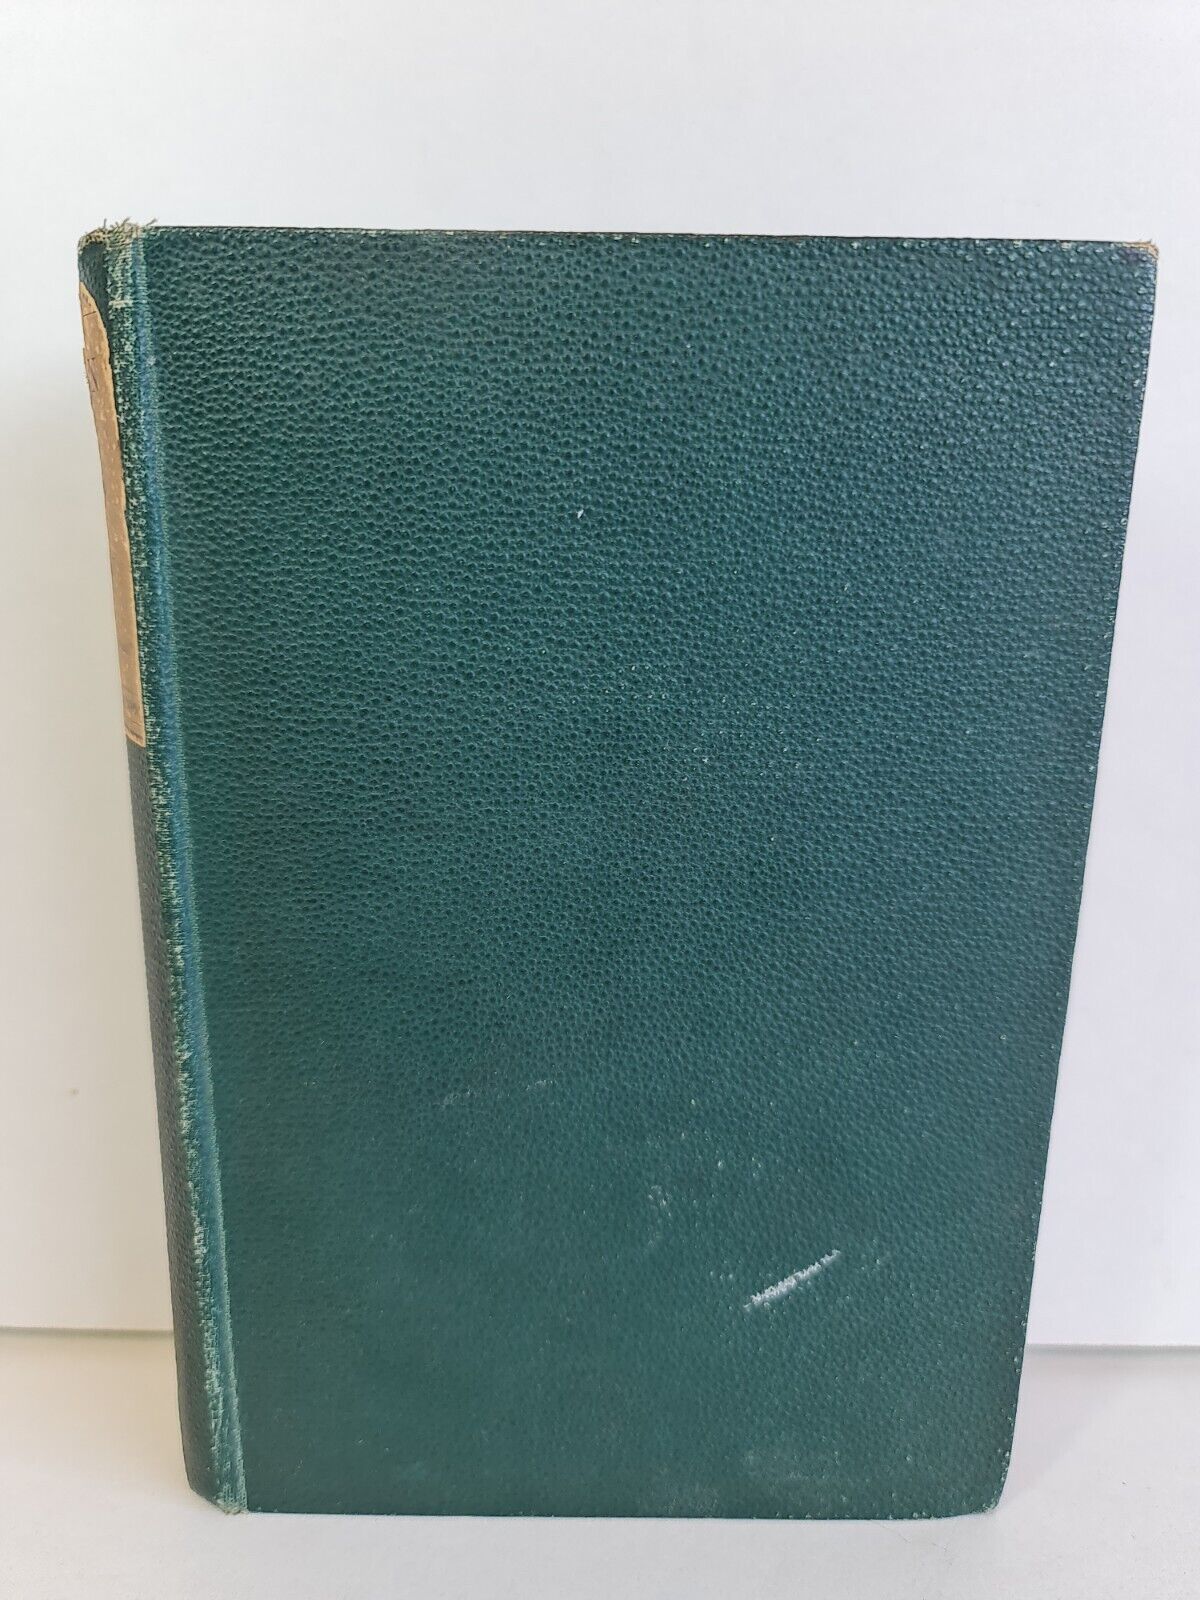 Walden by Henry D. Thoreau (1884 - First British Edition)